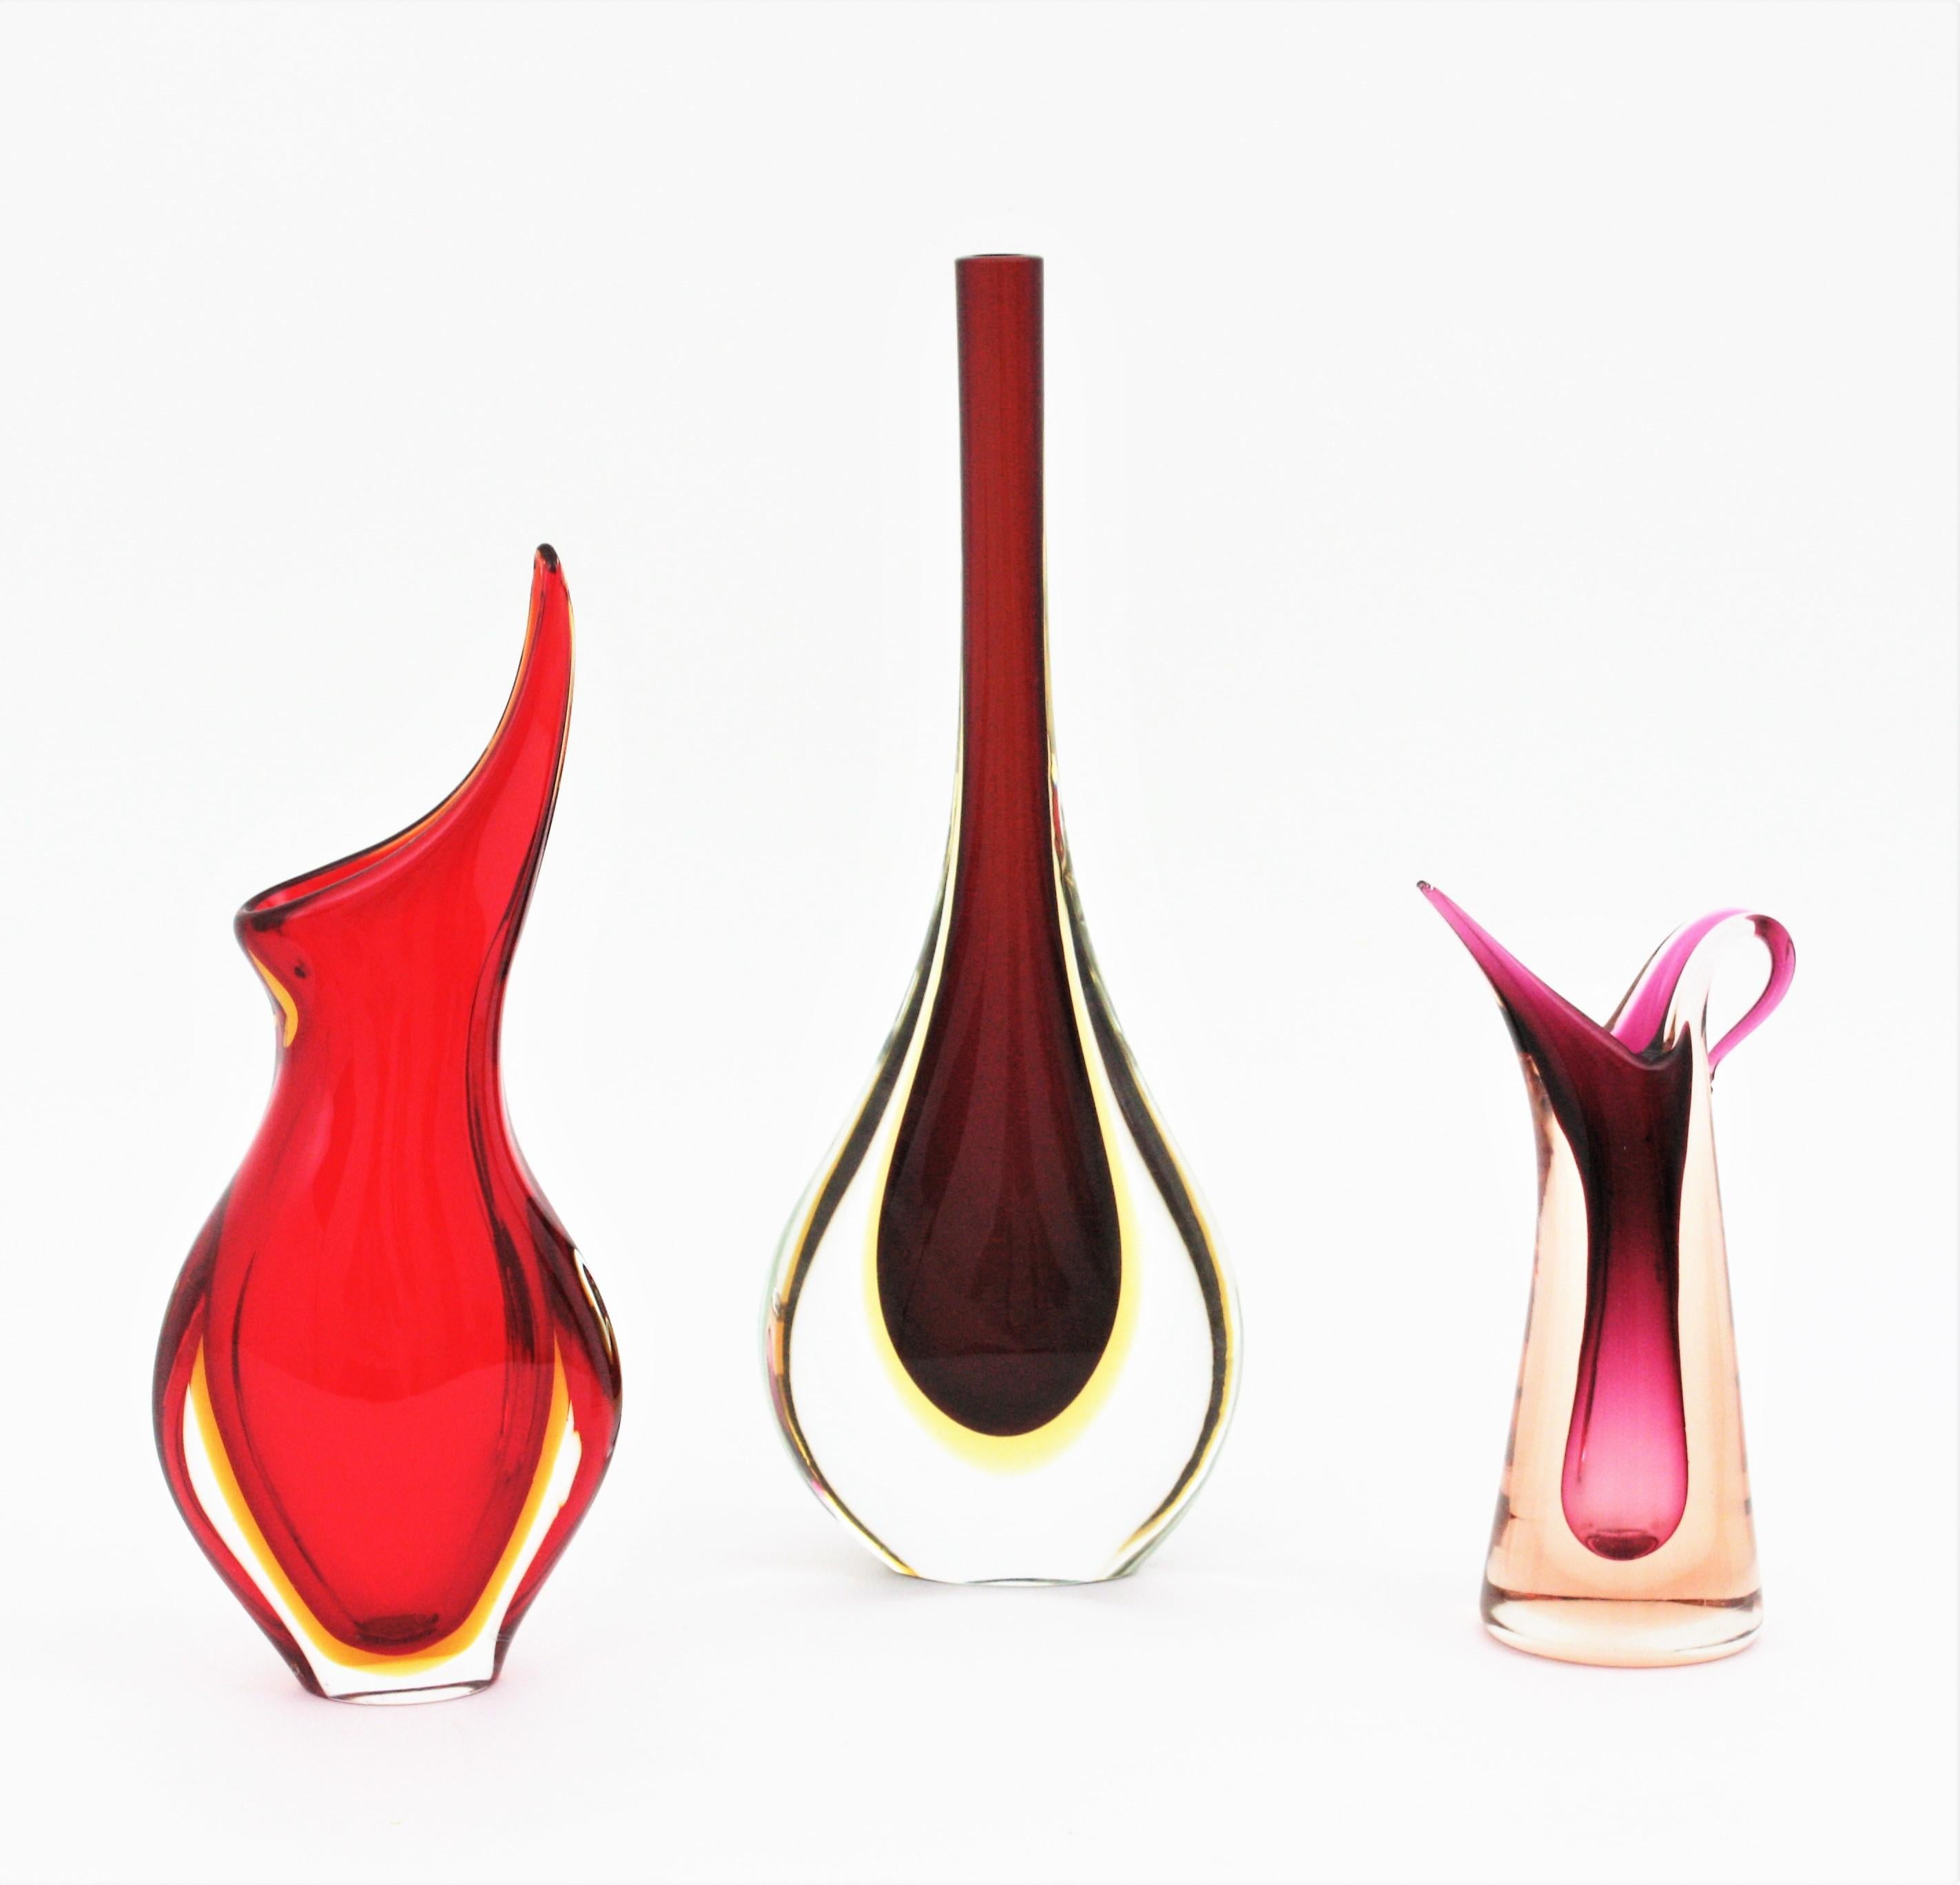 A wonderful red and yellow hand blown Murano glass vase. Designed by Flavio Poli and manufactured by Seguso Vetri d'Arte. Italy, 1950s.
Red glass with a layer of yellow glass cased into clear glass using the Sommerso technique.
Amazing organic